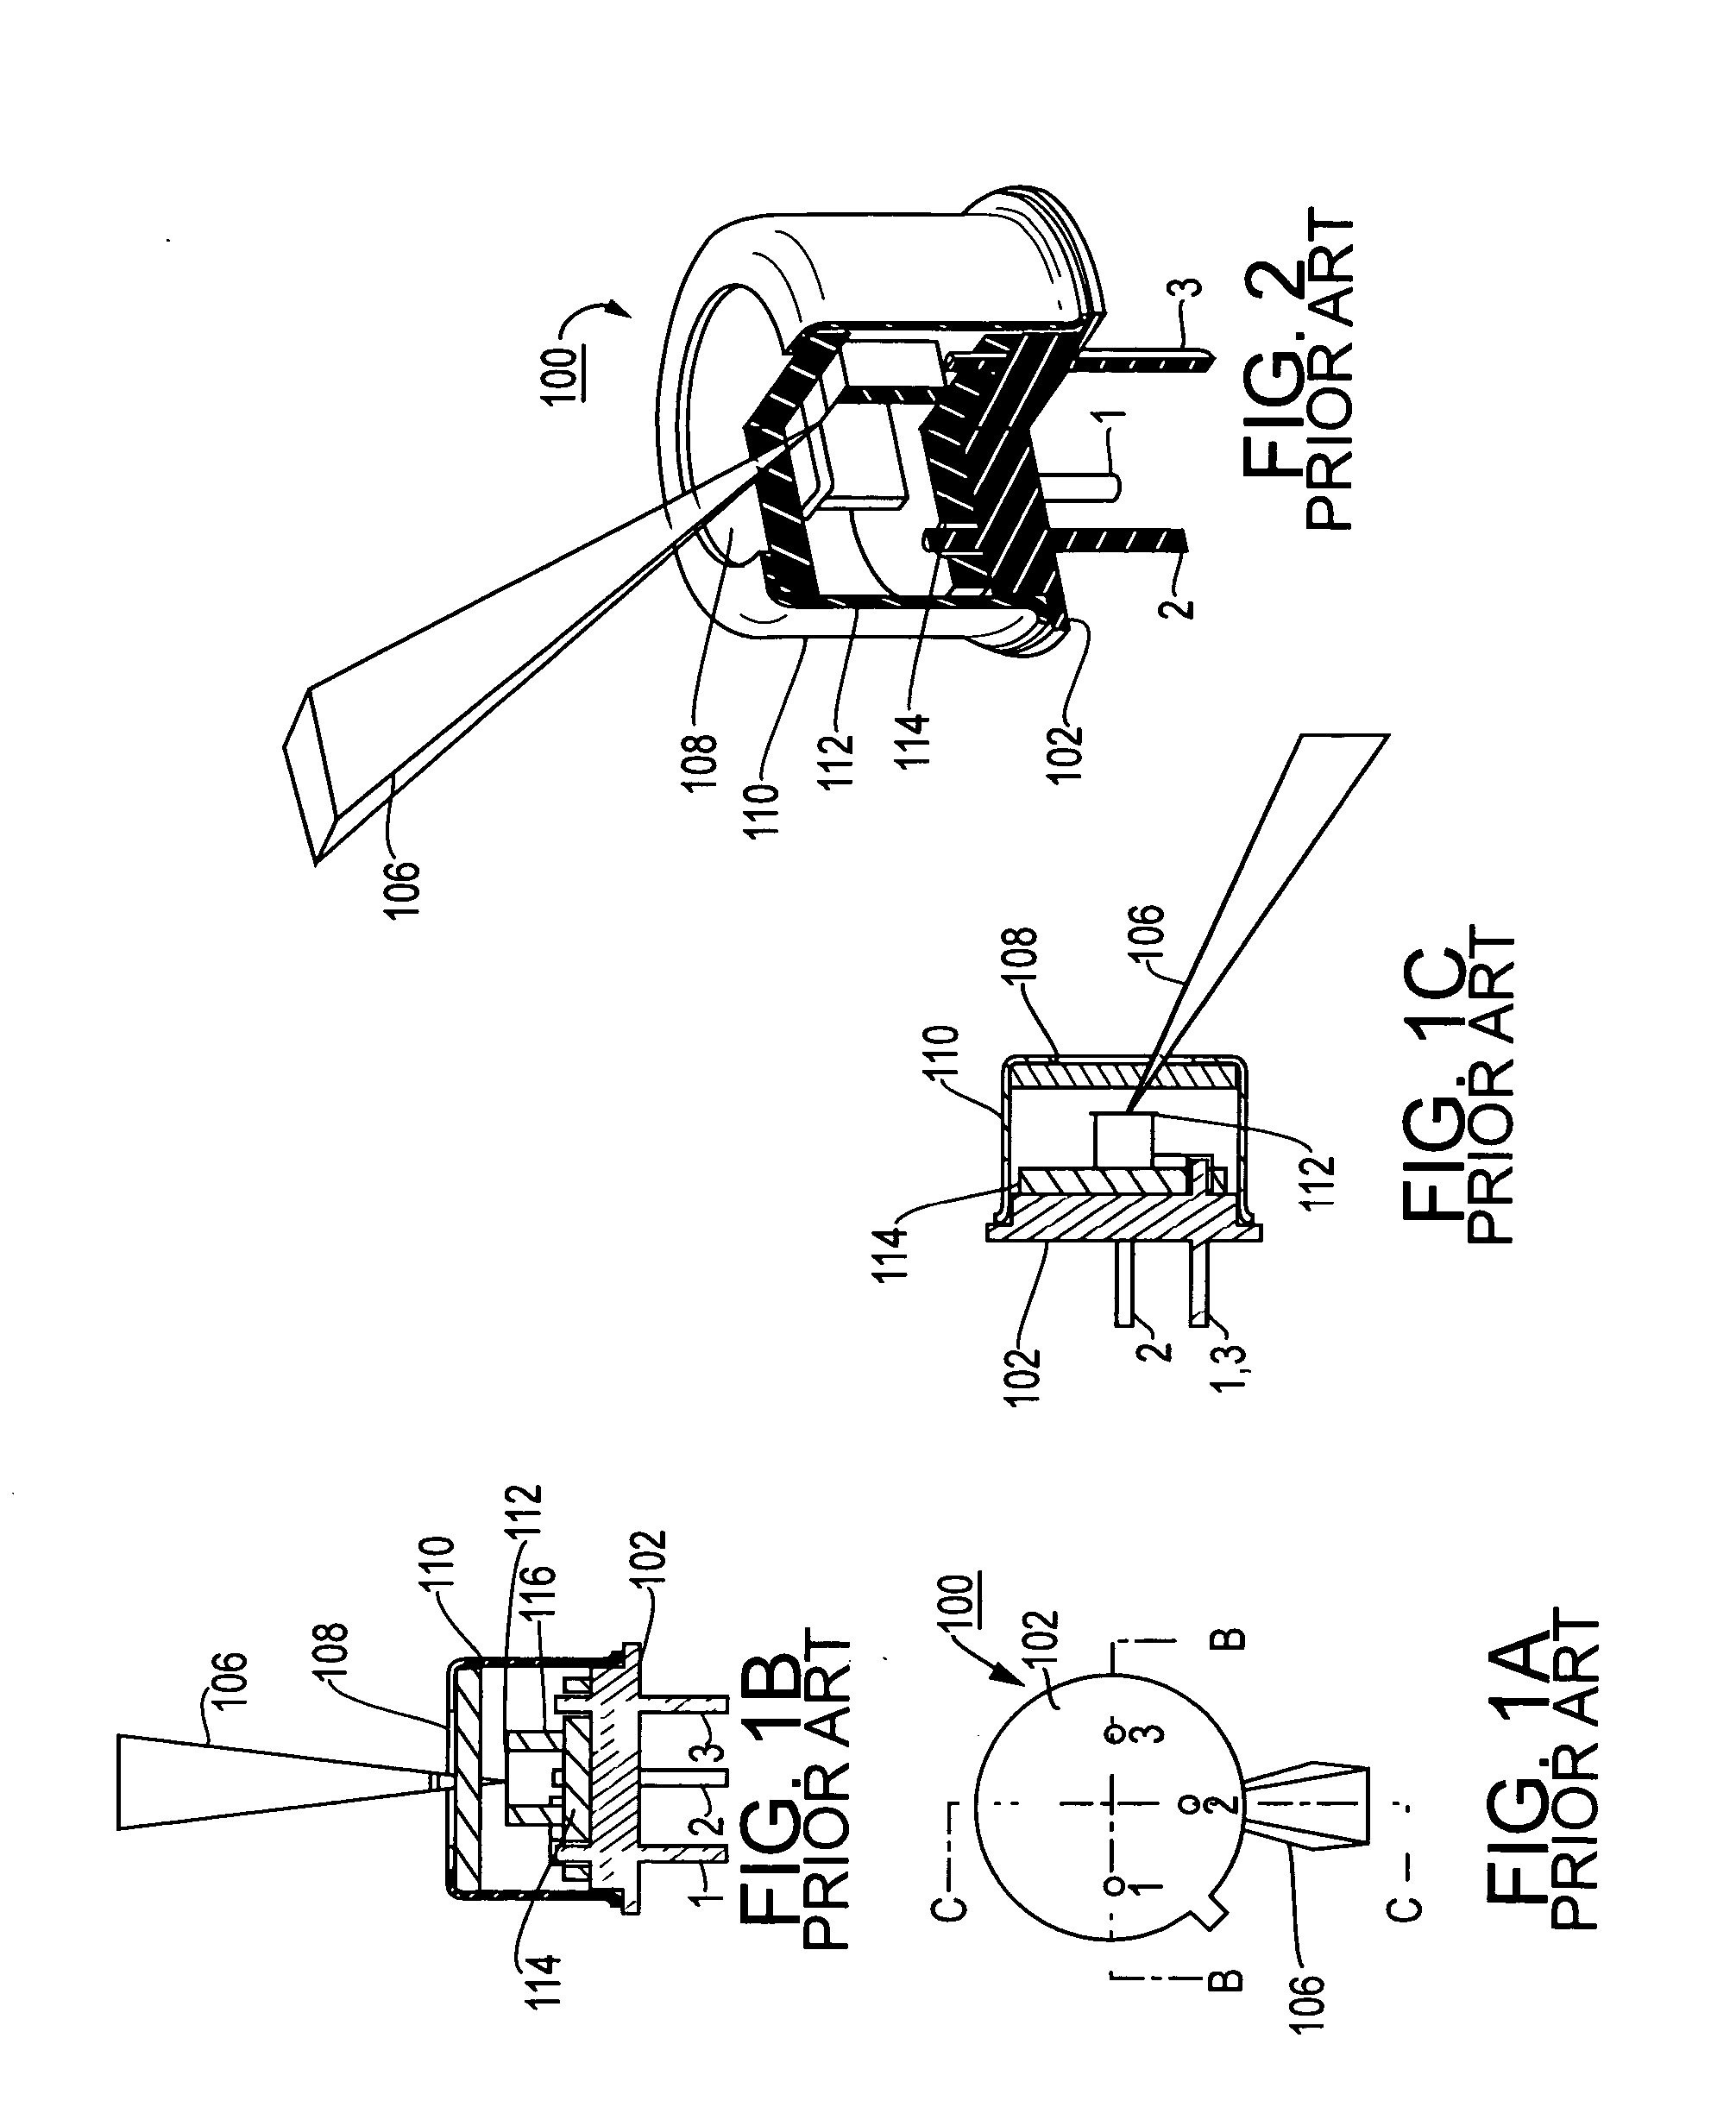 MEMS based space safety infrared sensor apparatus and method for detecting a gas or vapor